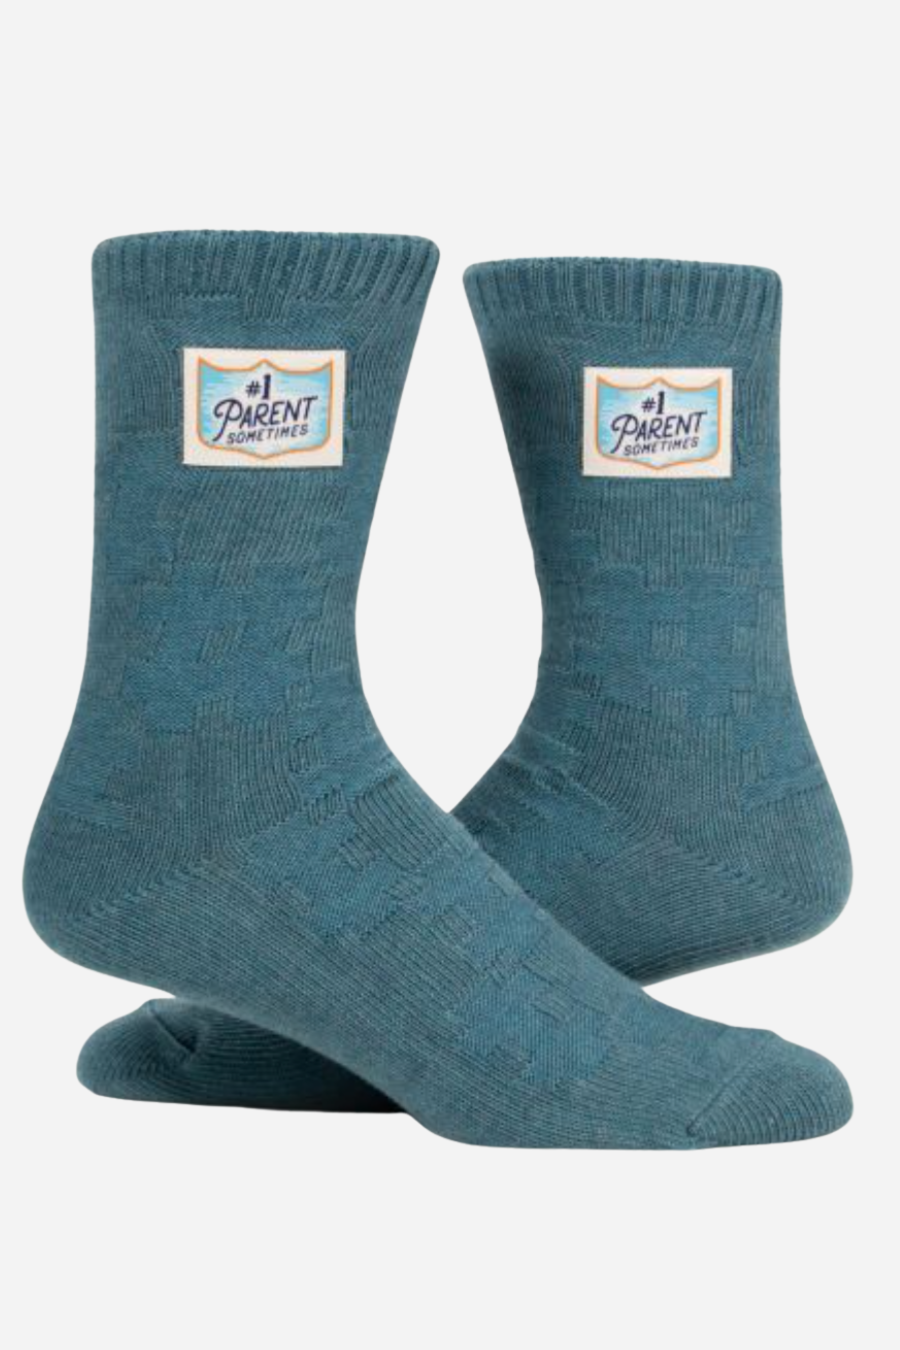 Cotton Crew "Tag" Socks from Blue Q